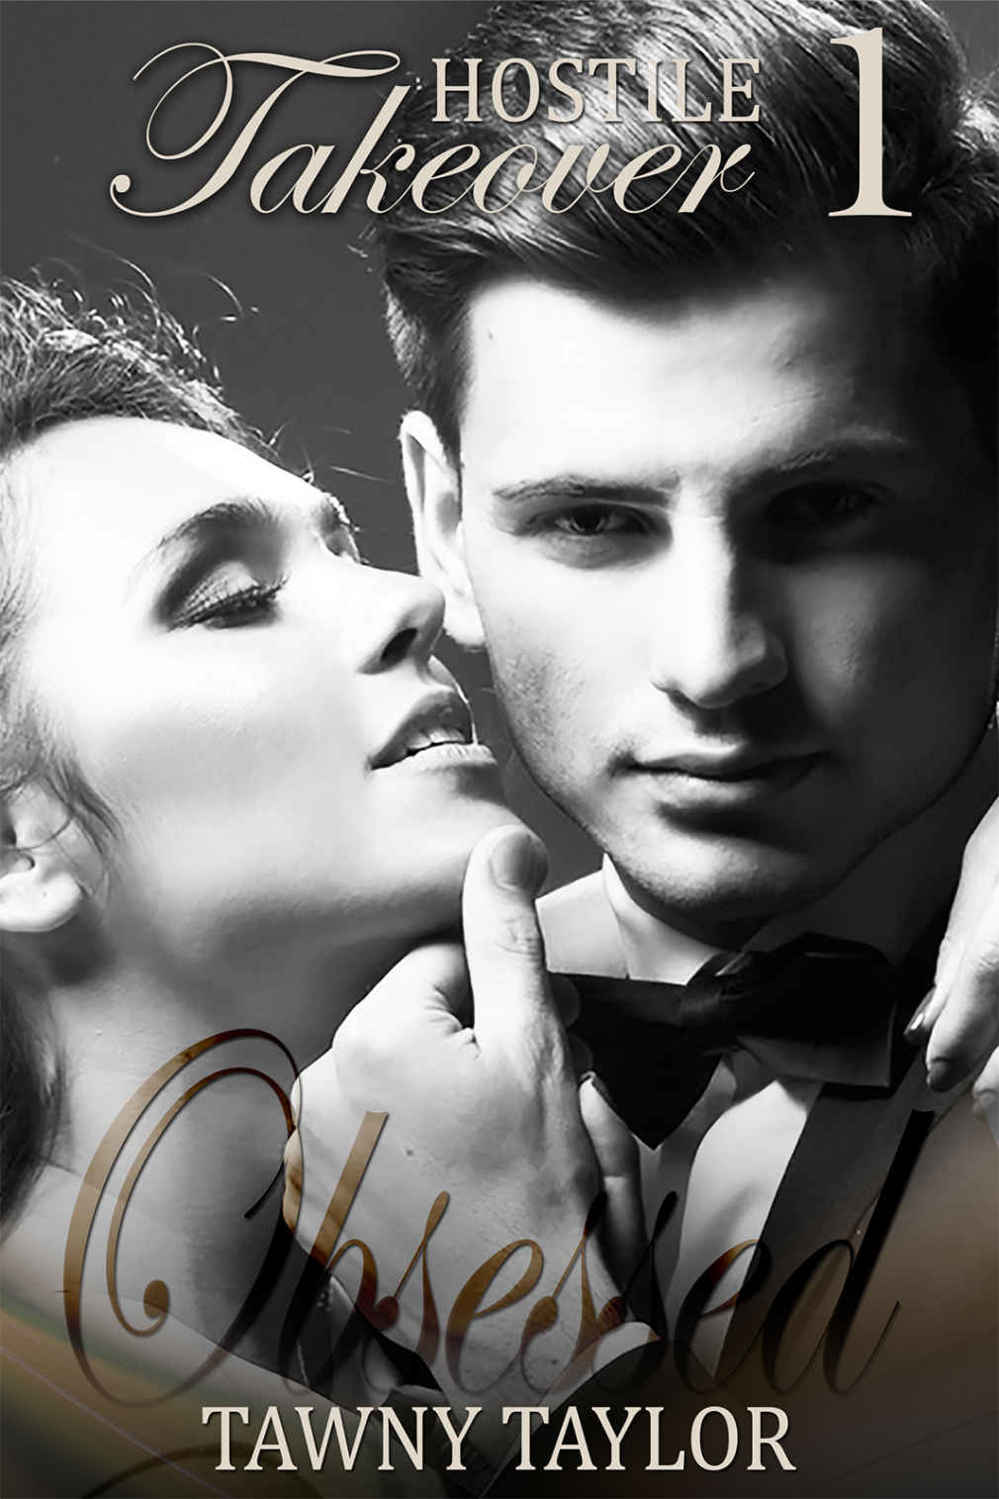 Obsessed (Hostile Takeover #1) by Tawny Taylor